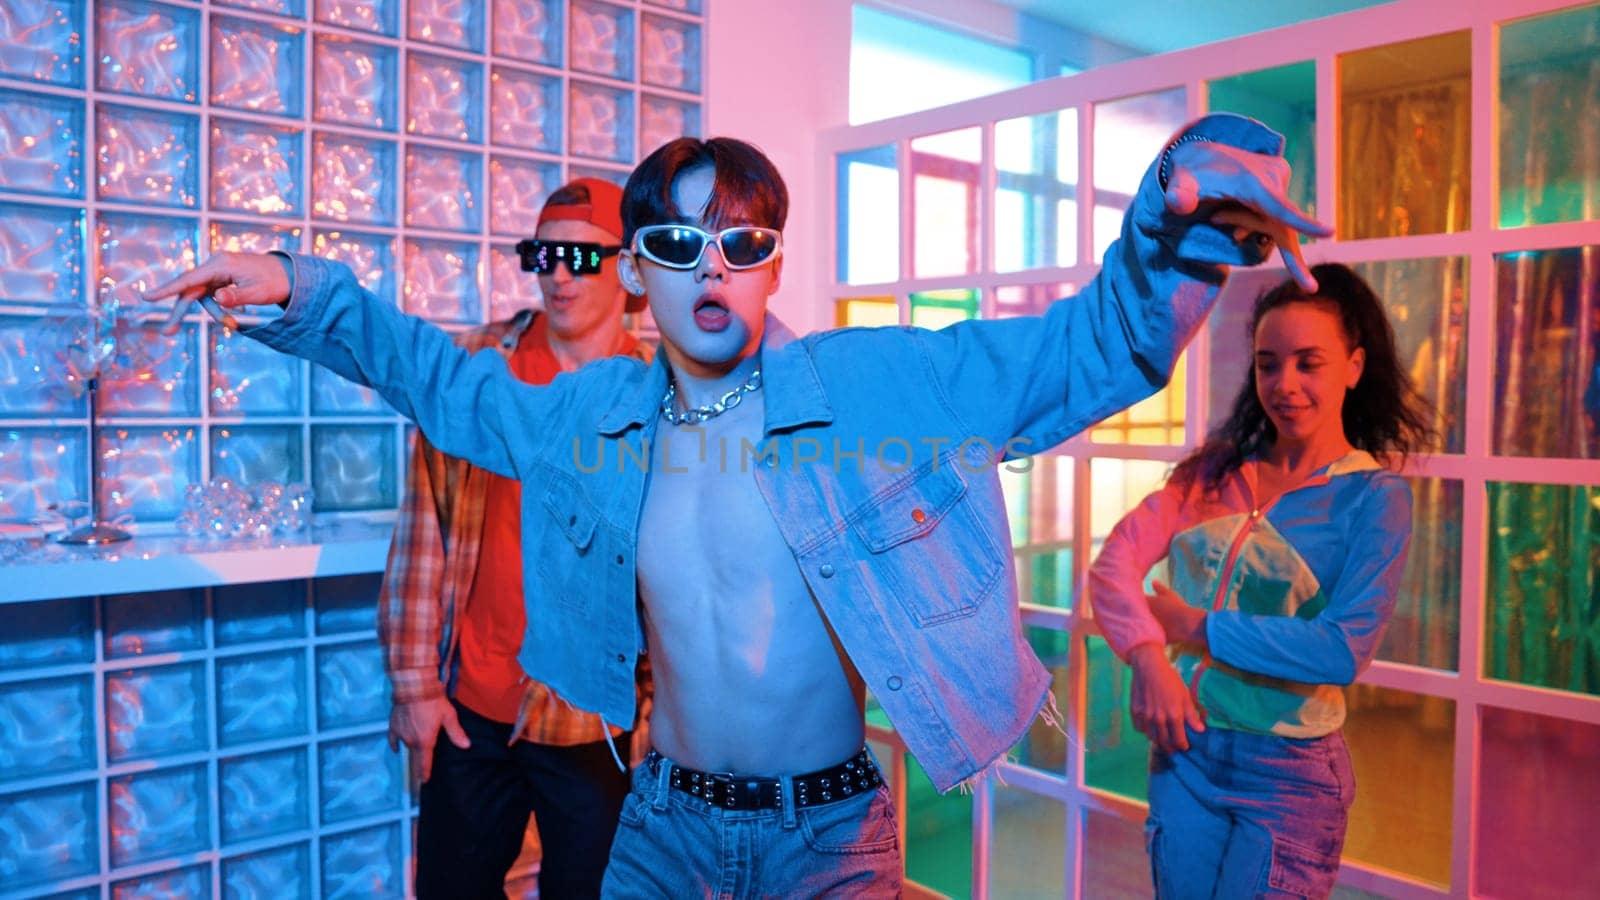 Asian man moving his arm while dancing with diverse team in neon light at night club. Happy dancer with stylish cloth moving along with multicultural hipster in lively mood at modern club. Regalement.